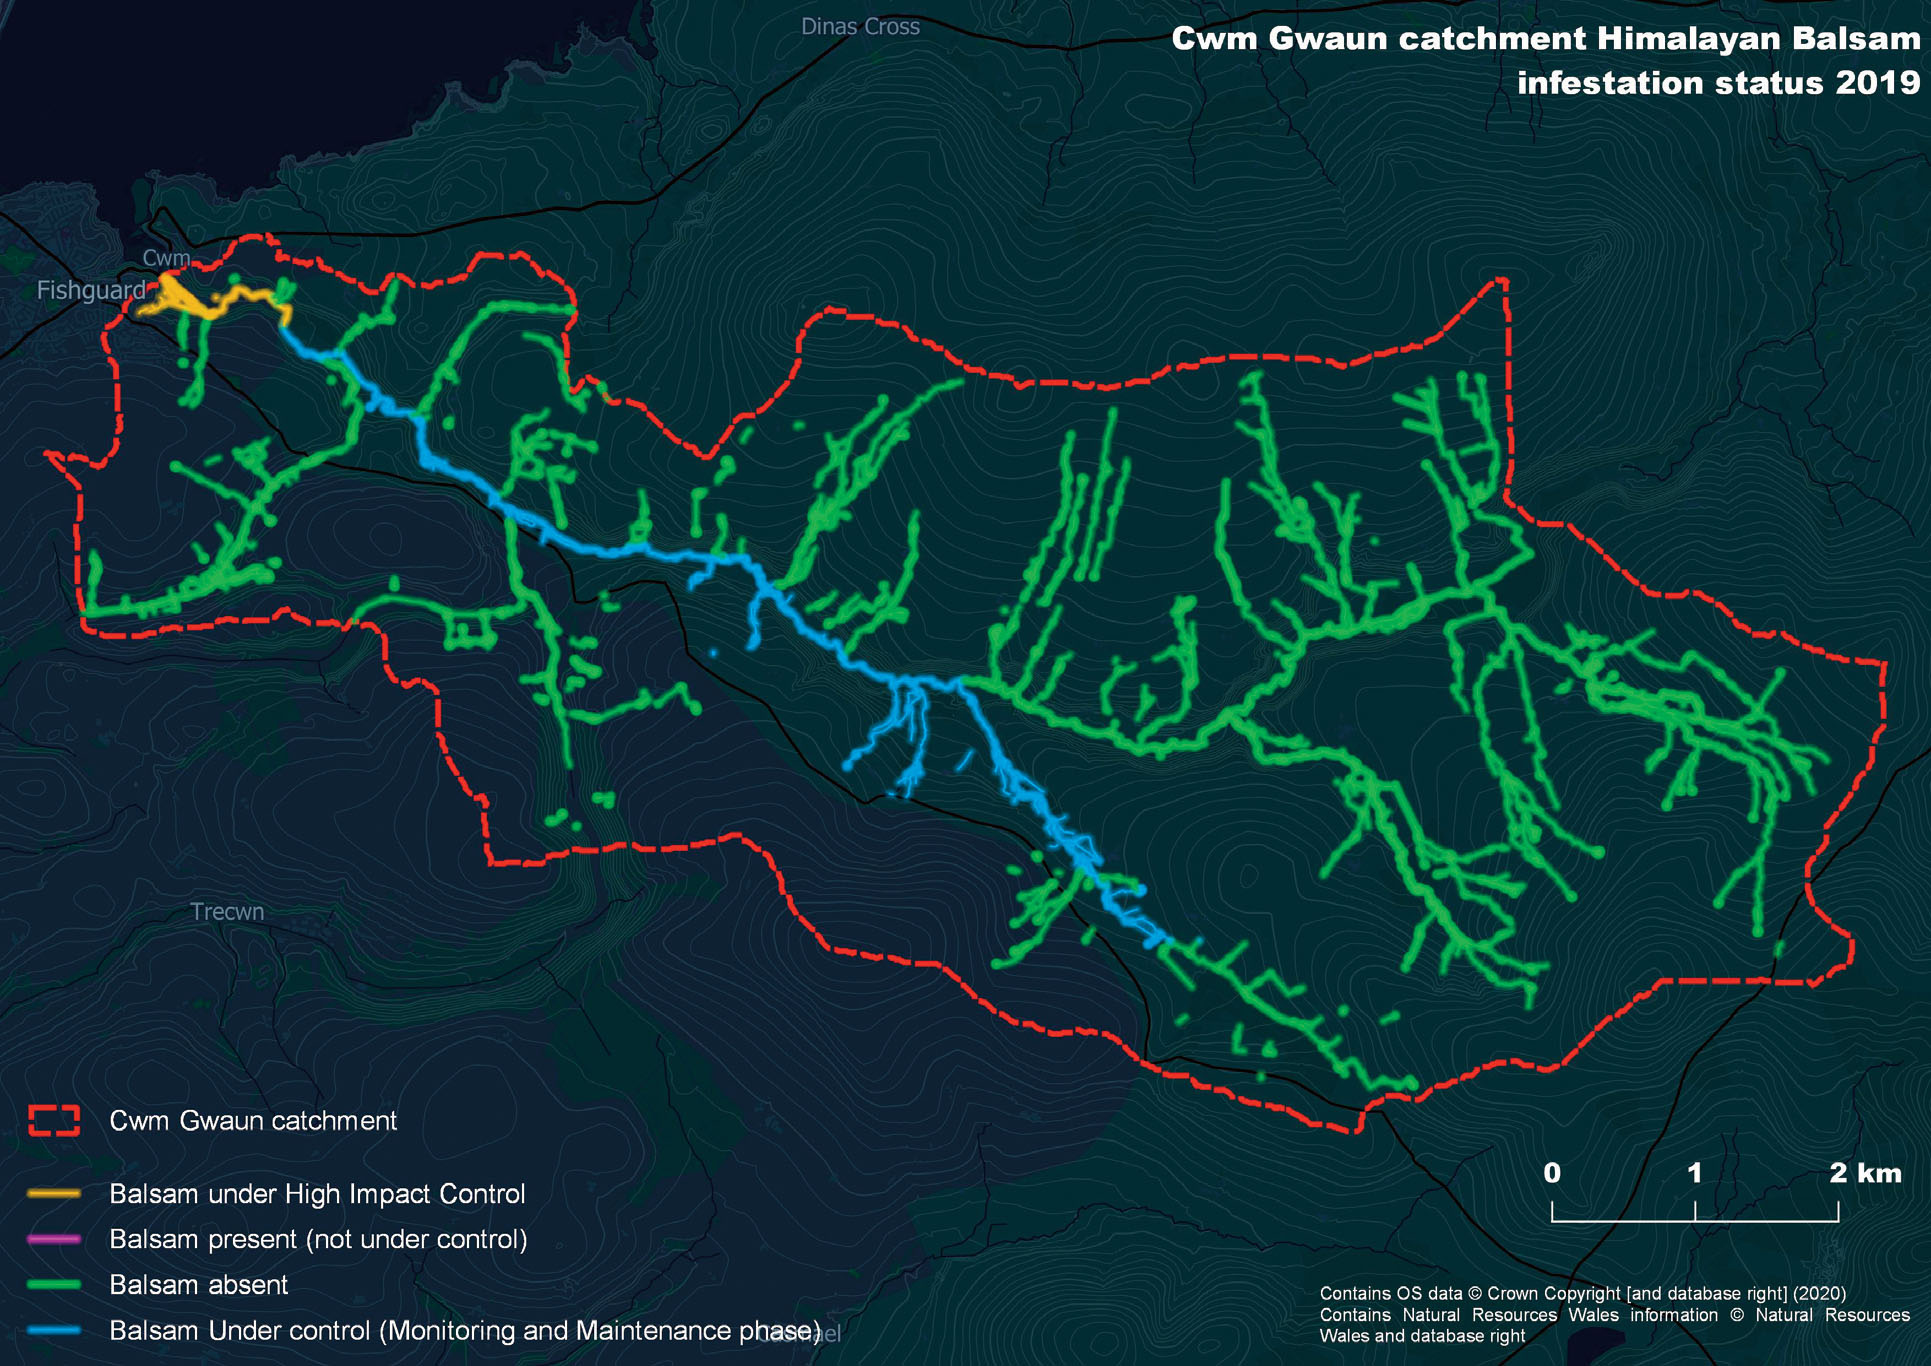 Map of Cwm Gwaun catchment area Himalayan Balsam infestation status 2019. Any polygon near water highlighted the area as pink for present, green for absent based on the point absence and presence survey data